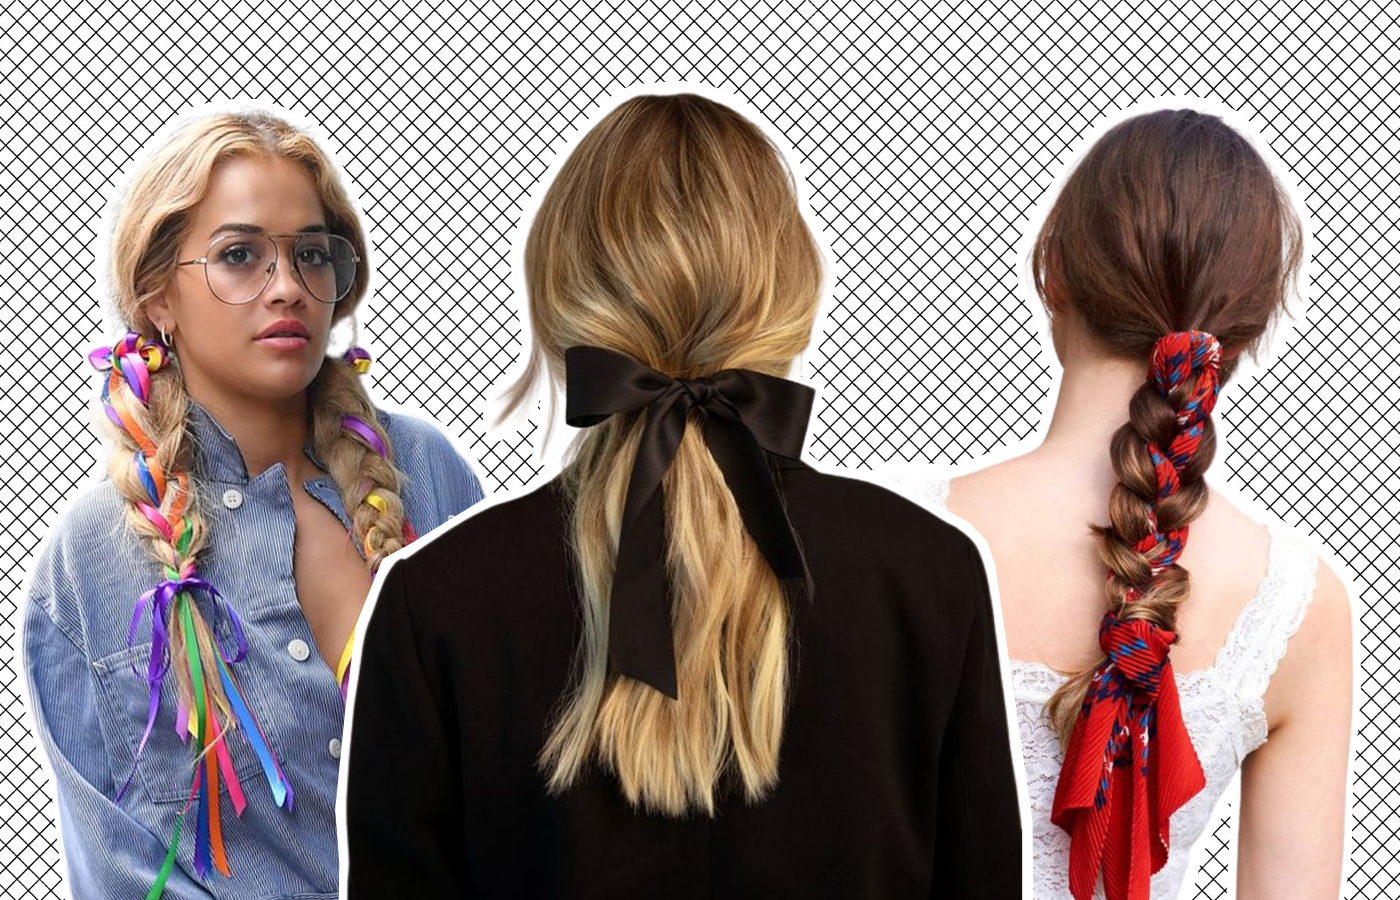 31 Chic Braided Hairstyles You'll Want To Wear Every Day